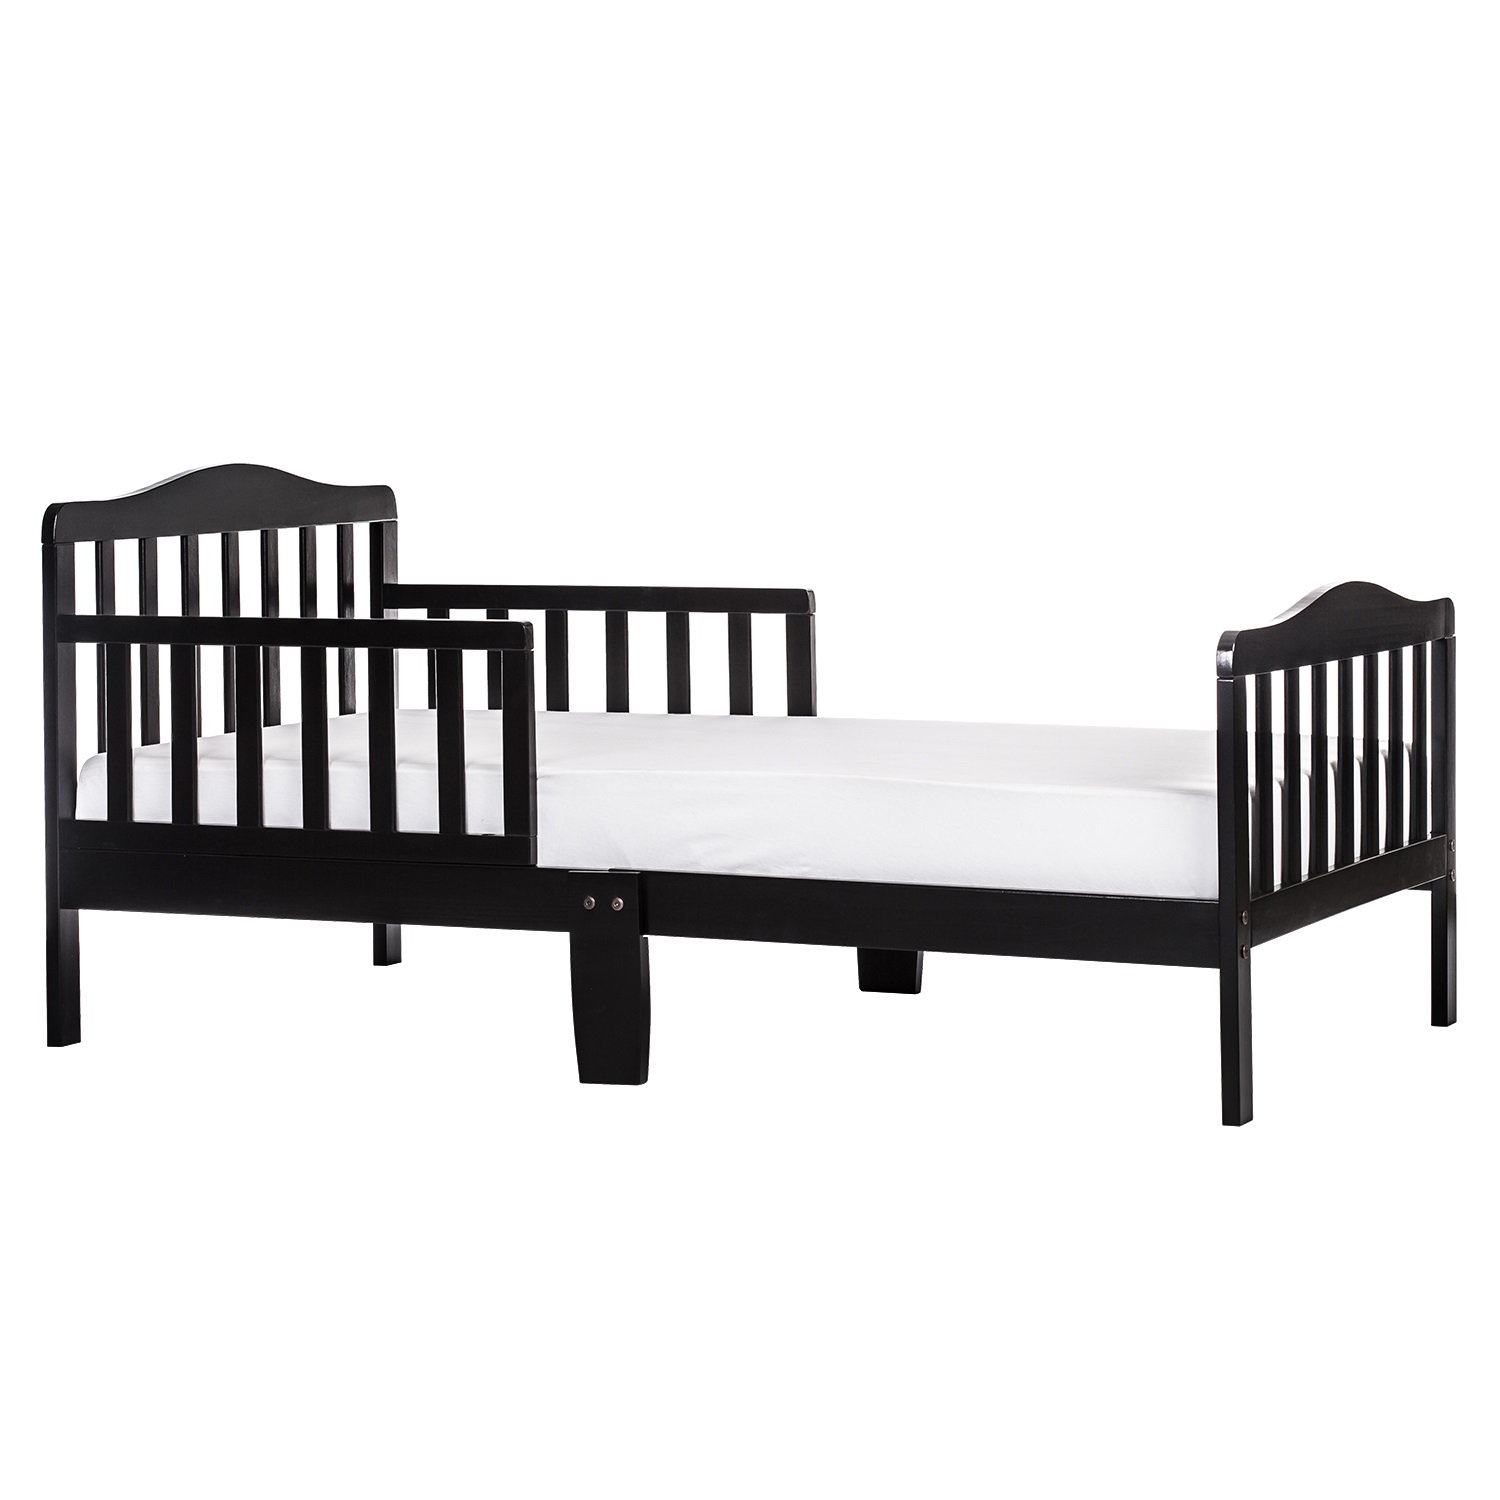 Dream On Me Classic Design Toddler Bed, Black - image 7 of 10